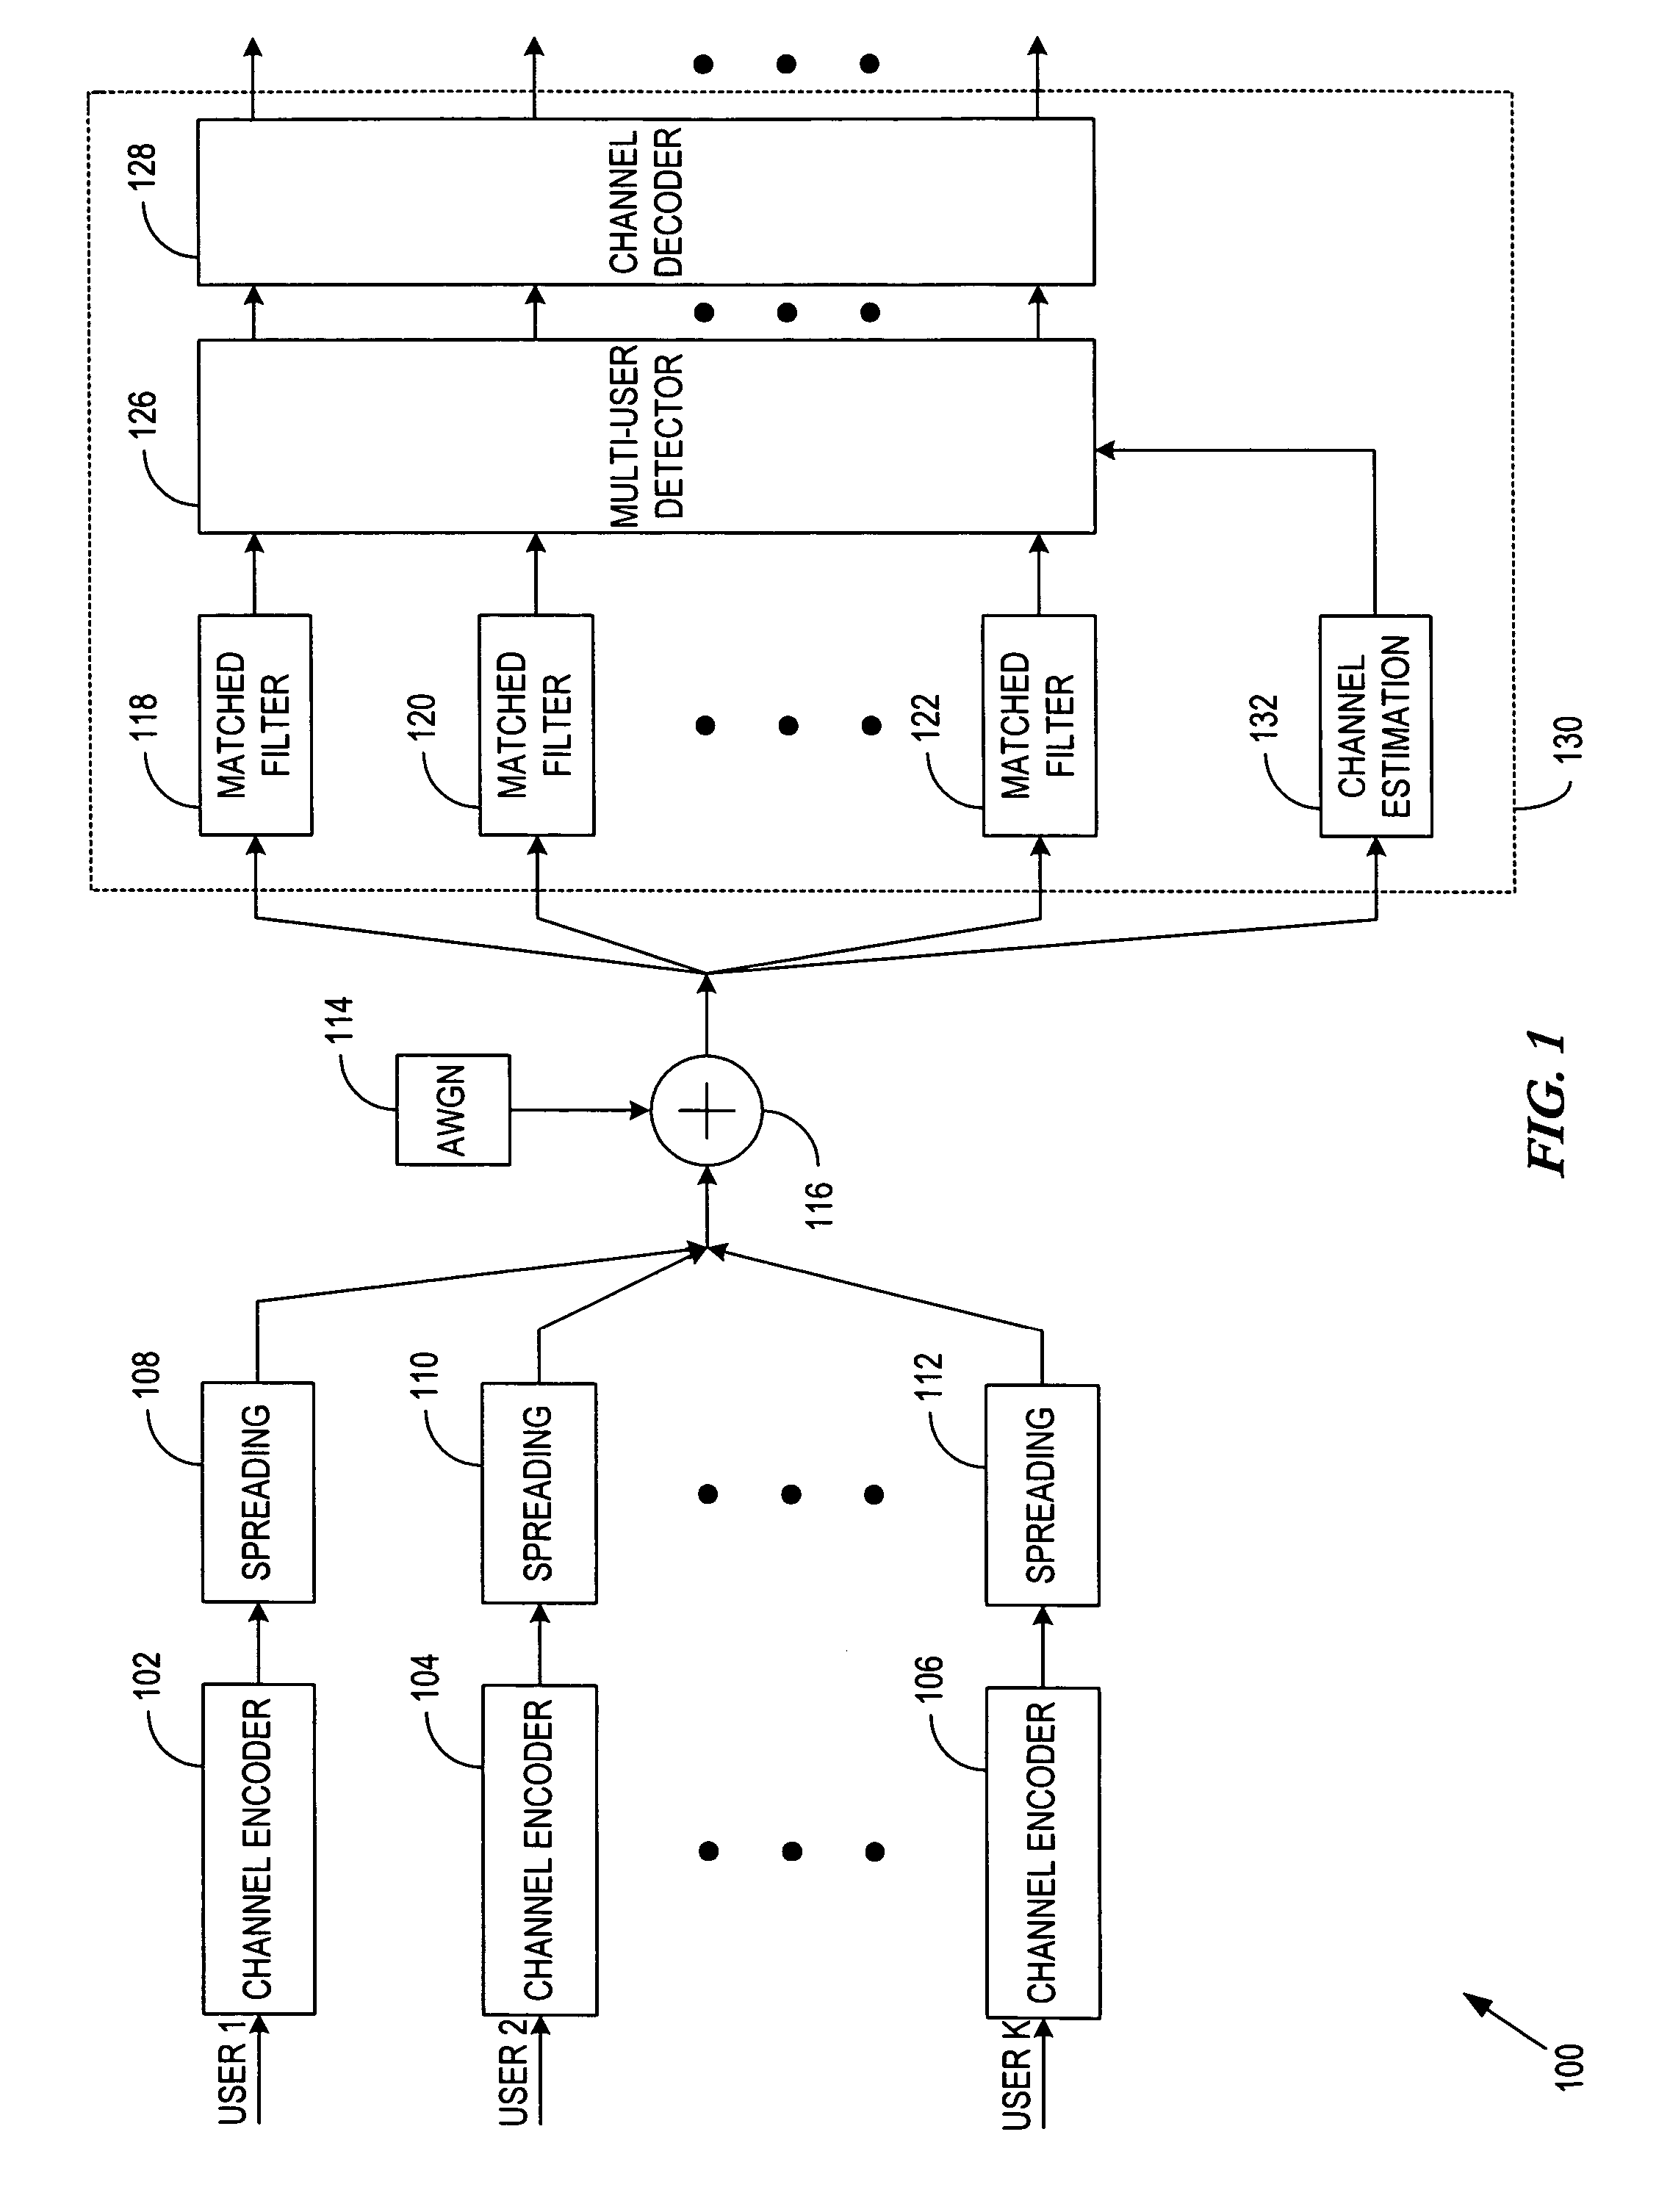 System, apparatus, and method for adaptive weighted interference cancellation using parallel residue compensation